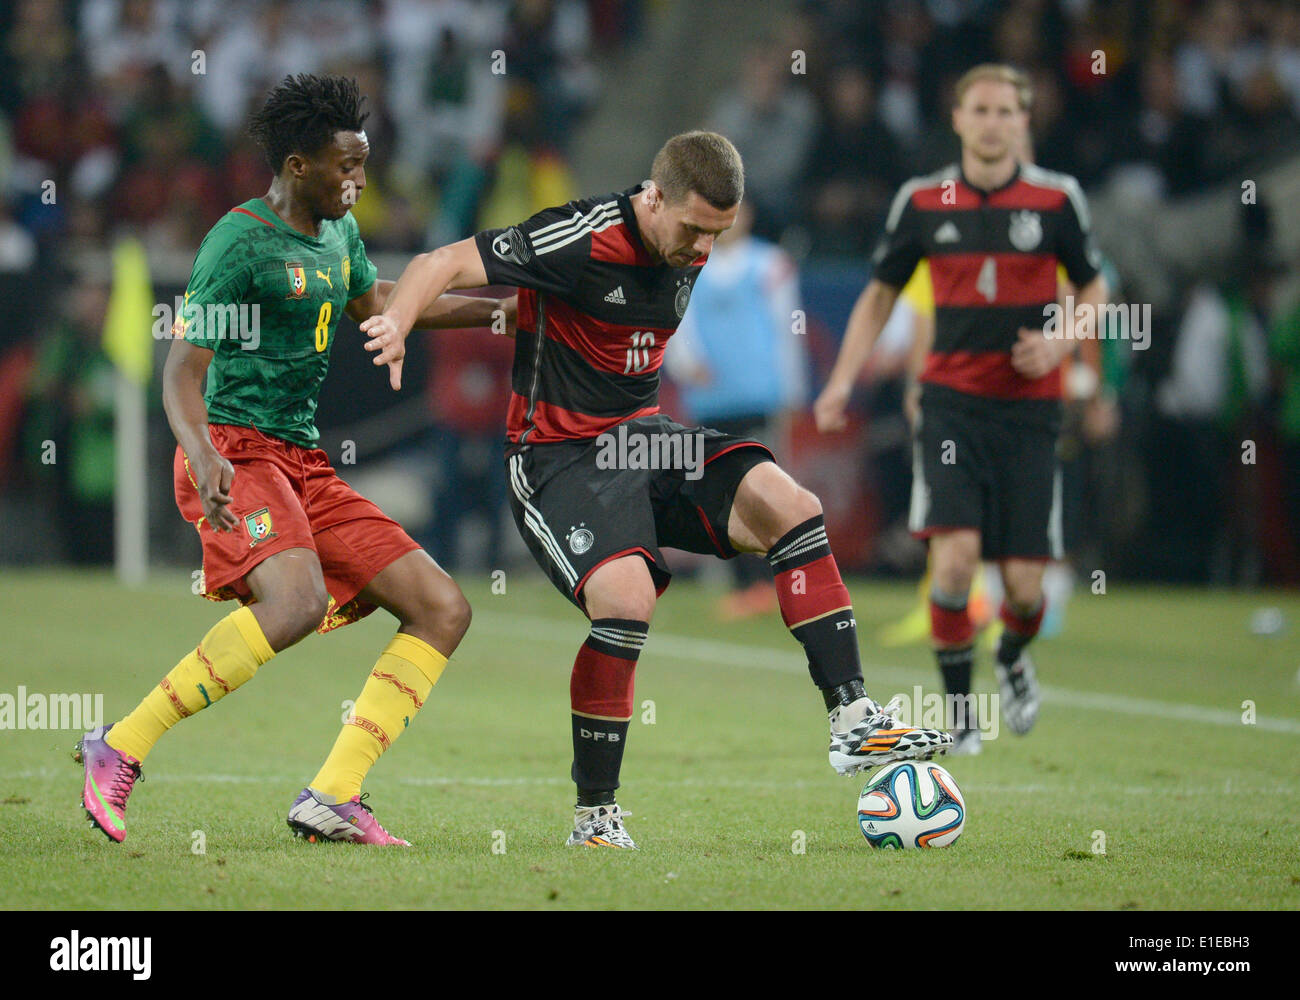 Moenchengladbach, Germany. 01st June, 2014. Germany's Lukas Podolski in action against Cameroon's Benjamin Moukandjo (R) during the friendly soccer match between Germany and Cameroon at the Borussia Park stadium in Moenchengladbach, Germany, 01 June 2014. Photo: Bernd Thissen/dpa/Alamy Live News Stock Photo